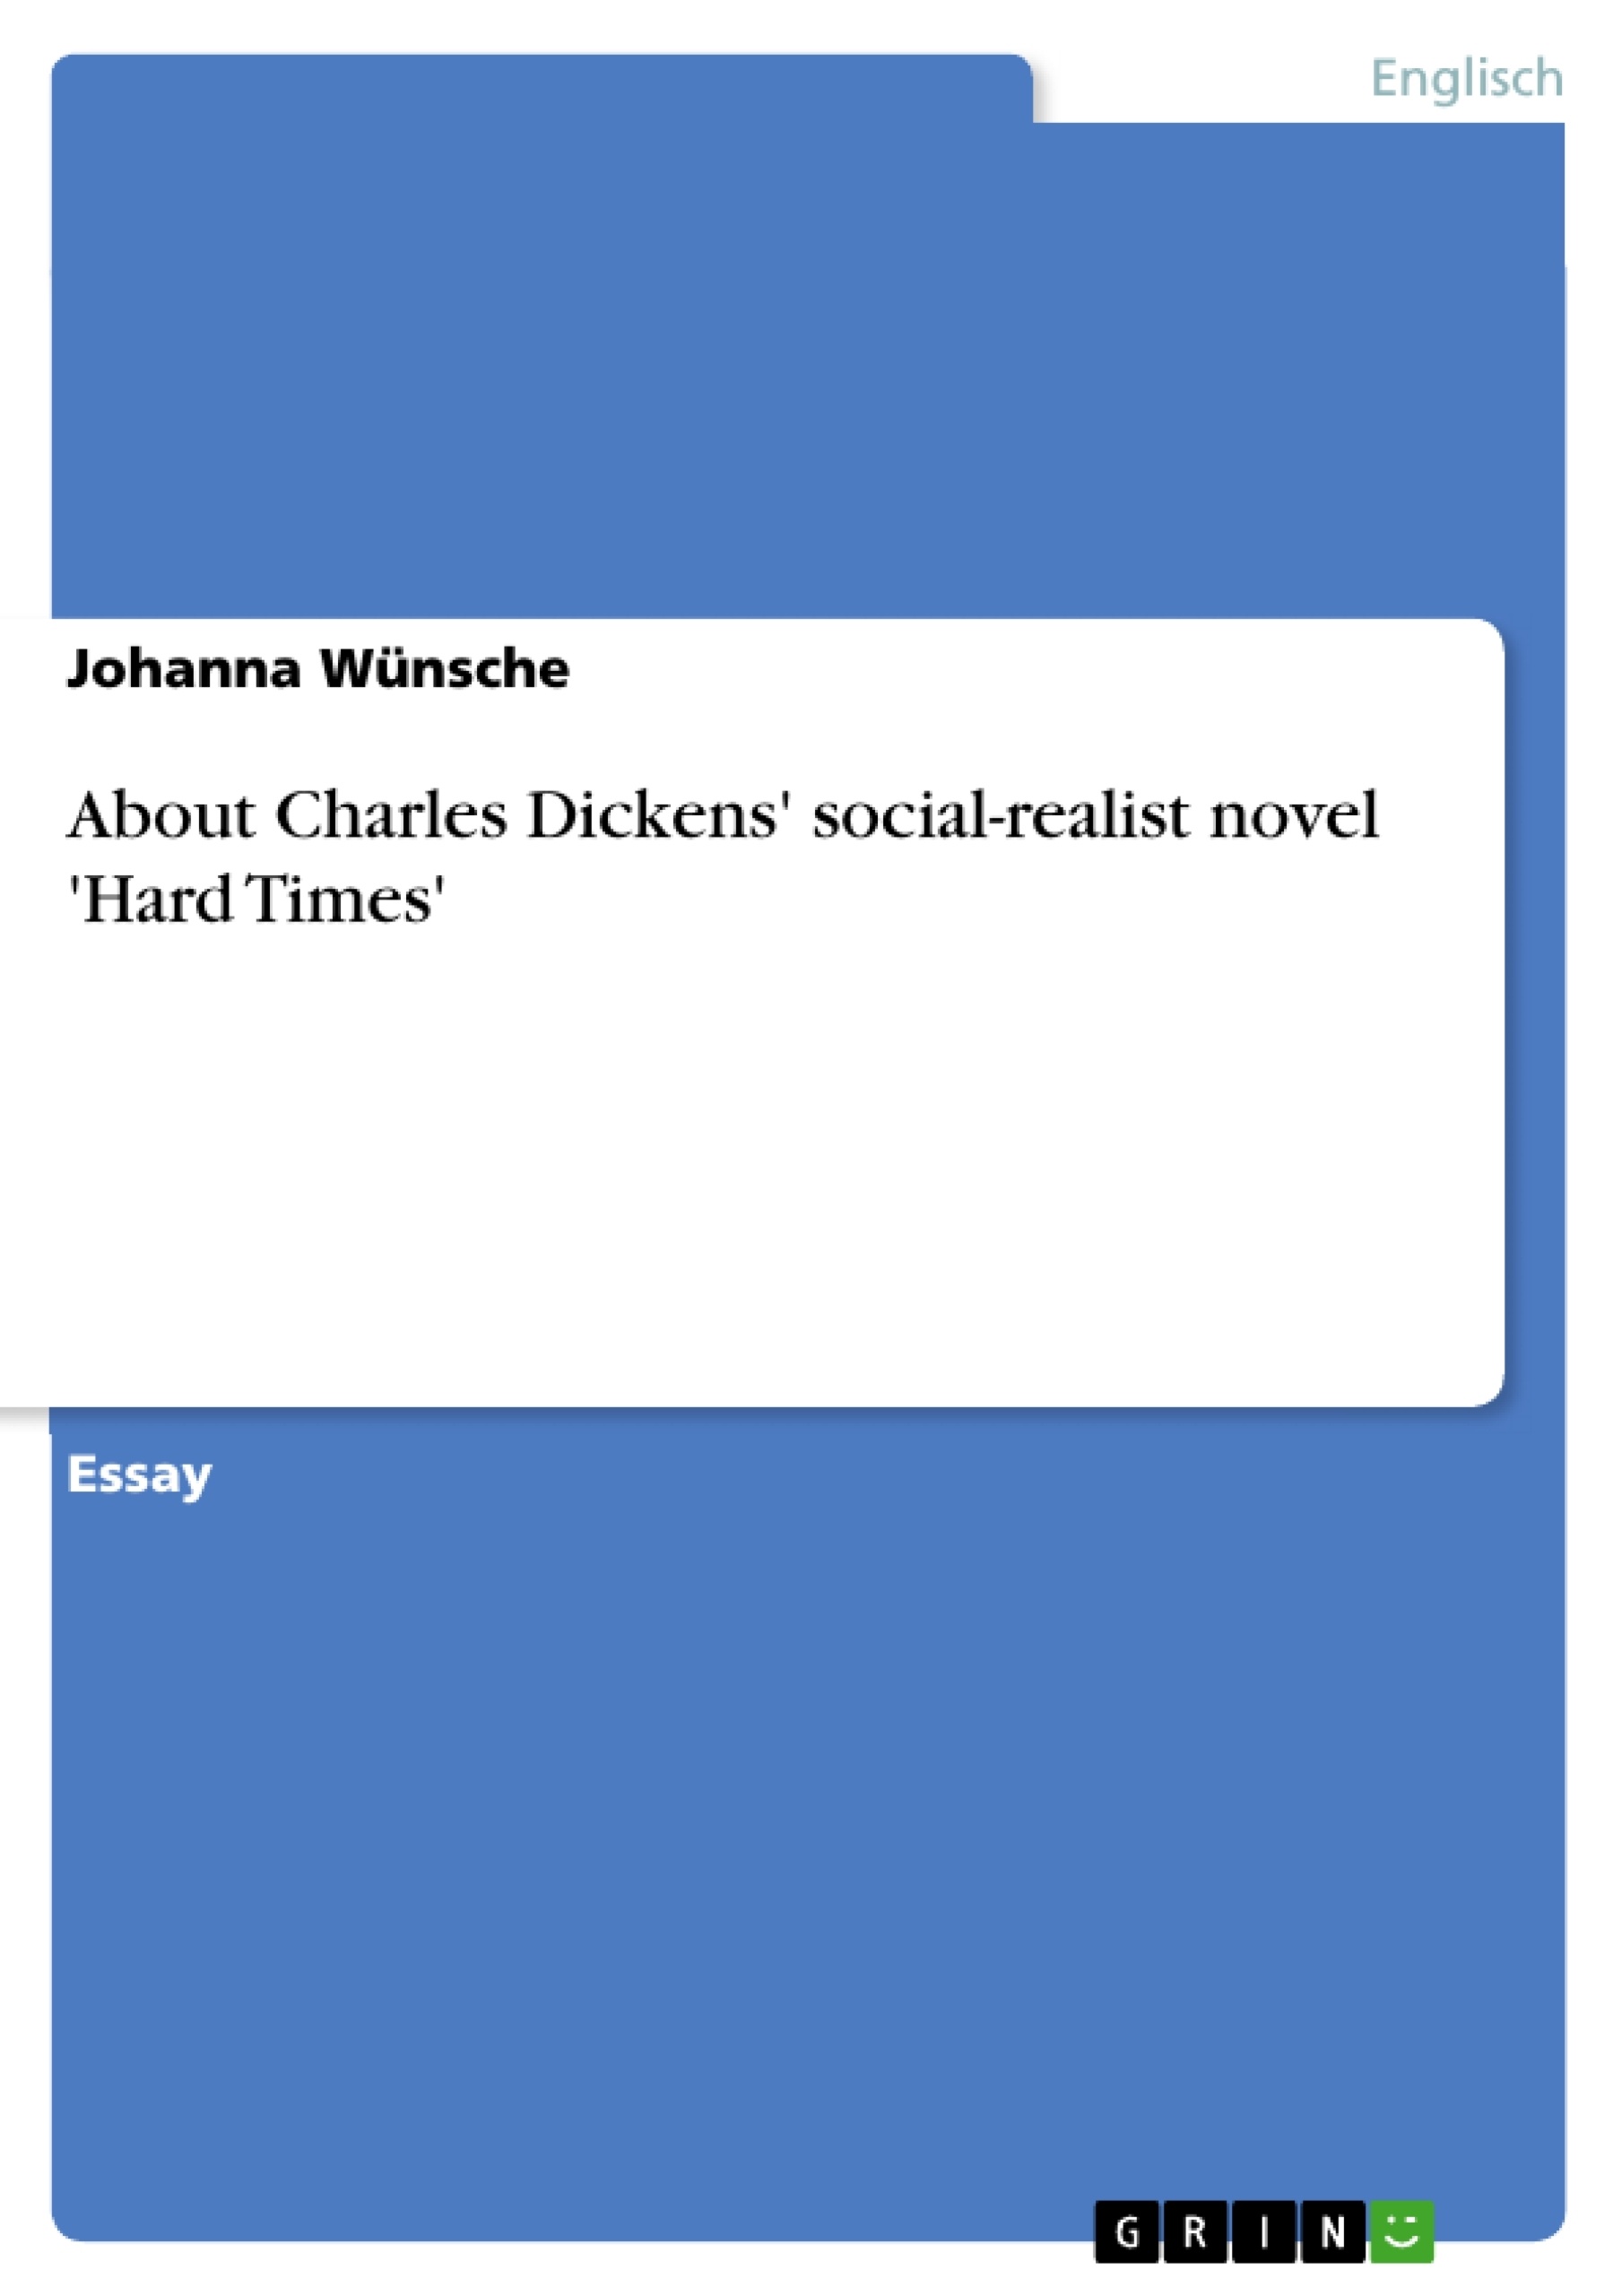 Titre: About Charles Dickens' social-realist novel 'Hard Times'